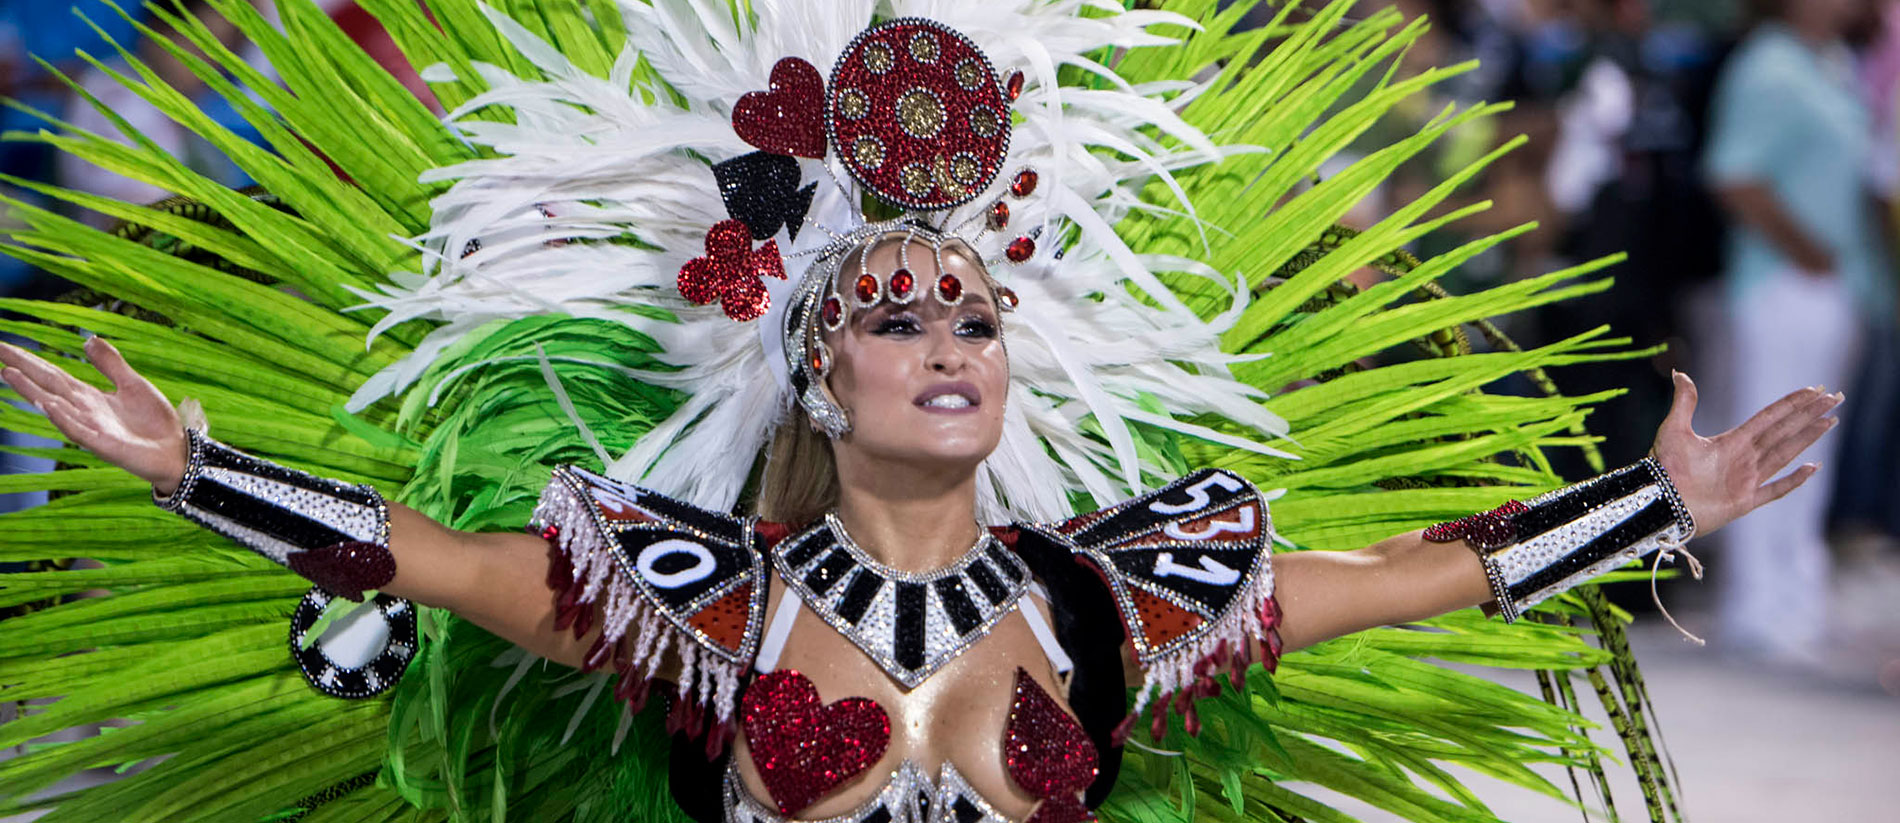 Rio Carnival 2022 Travel Package - TGW Travel Group